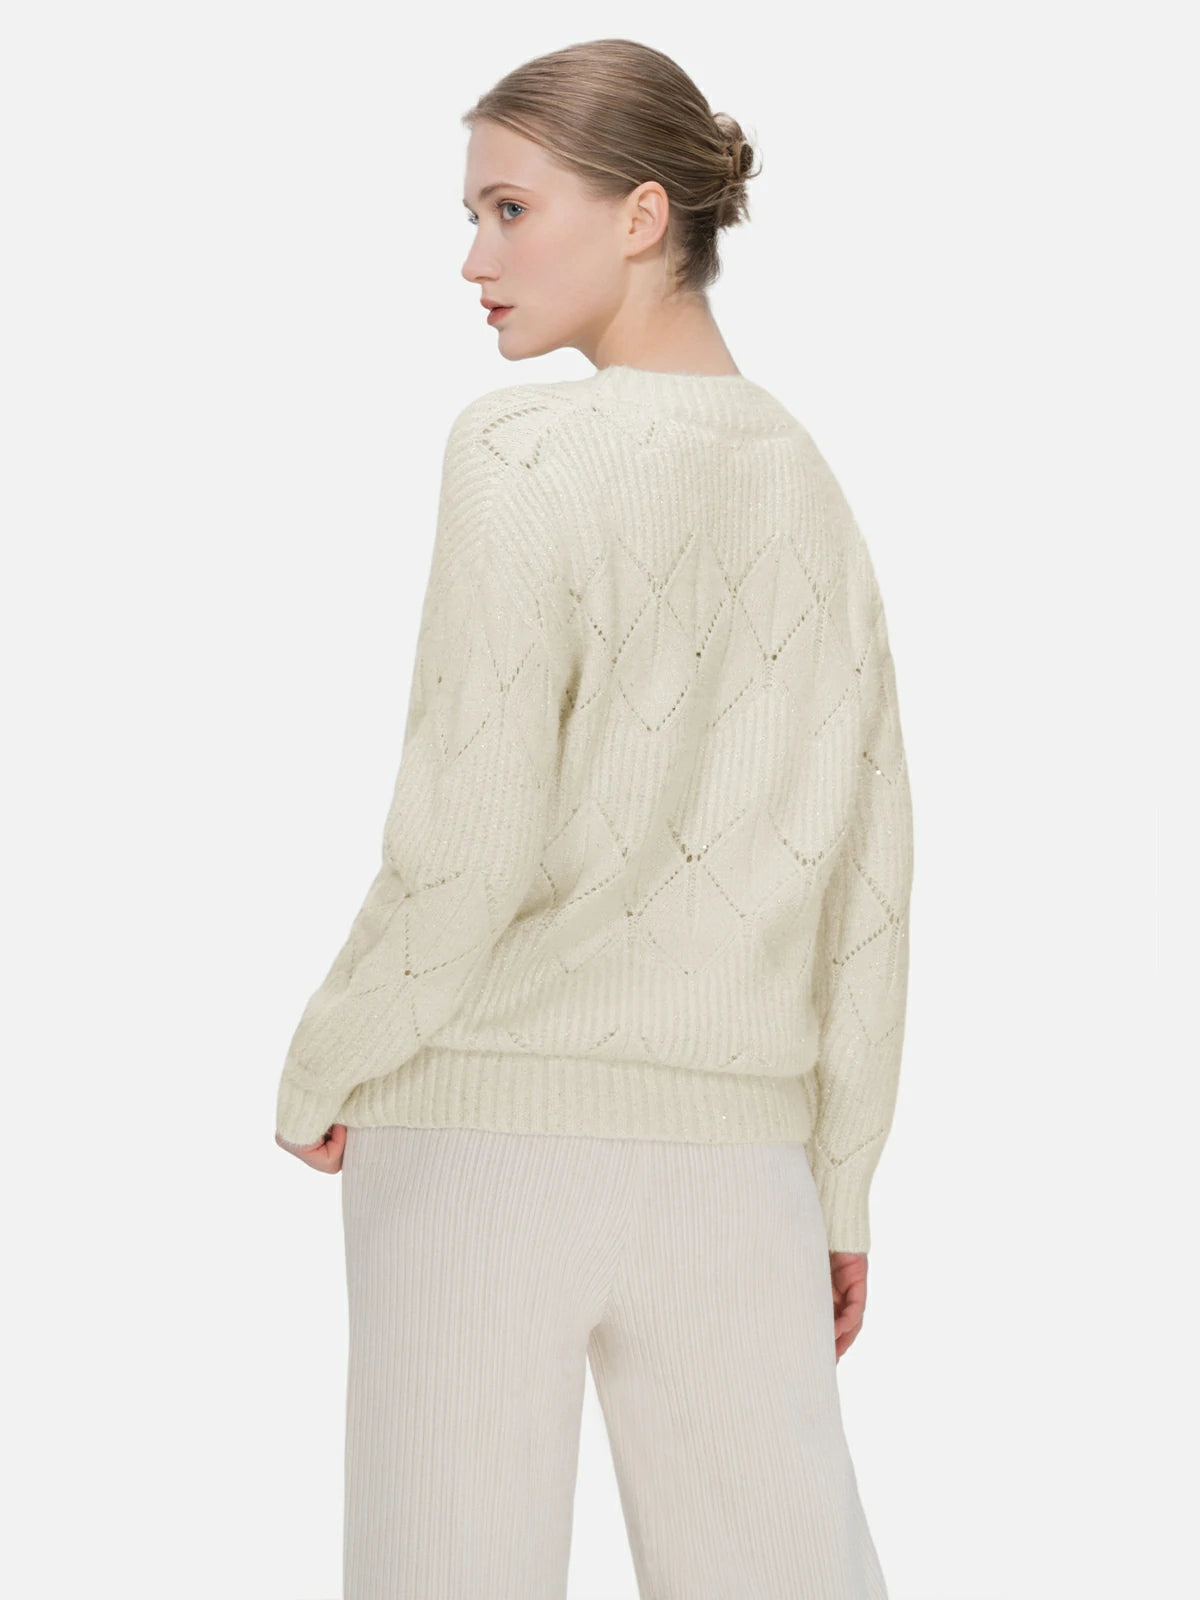 Tailored-fit diamond-cutout sweater, perfect for showcasing individual taste in fashion.